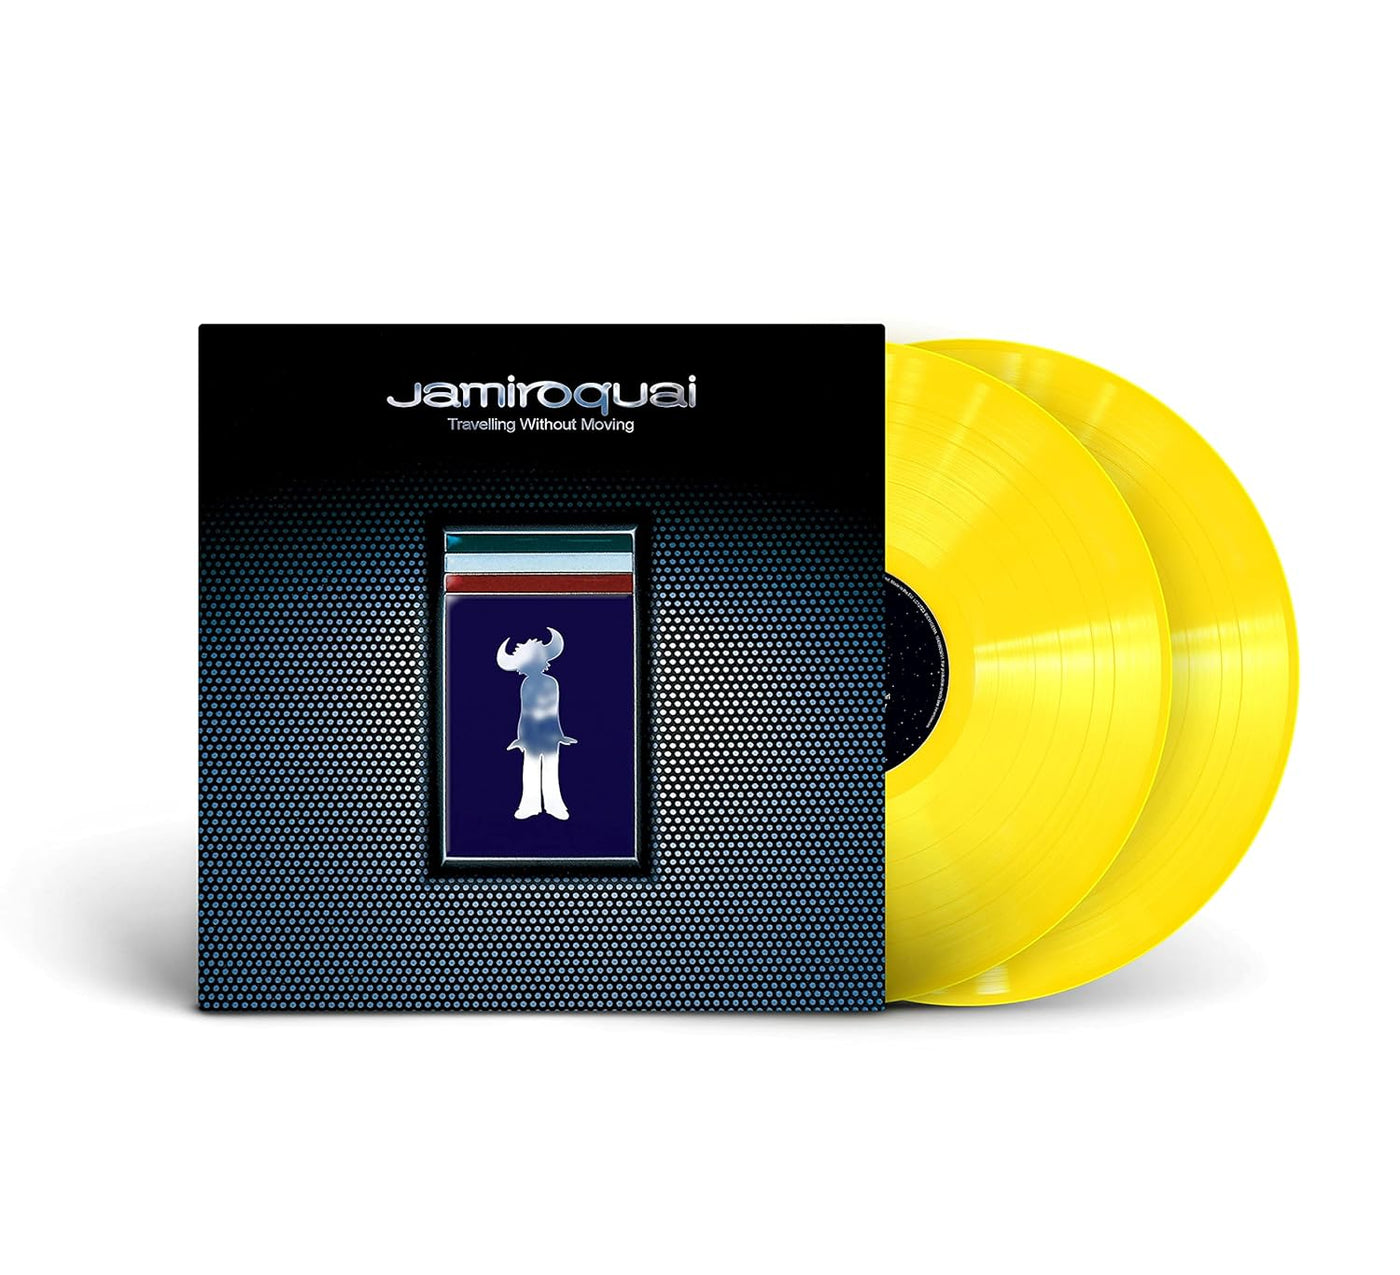 NEW/SEALED! Jamiroquai - Travelling Without Moving: 25th Anniversary (180 Gram Yellow Colored Vinyl) [Import]